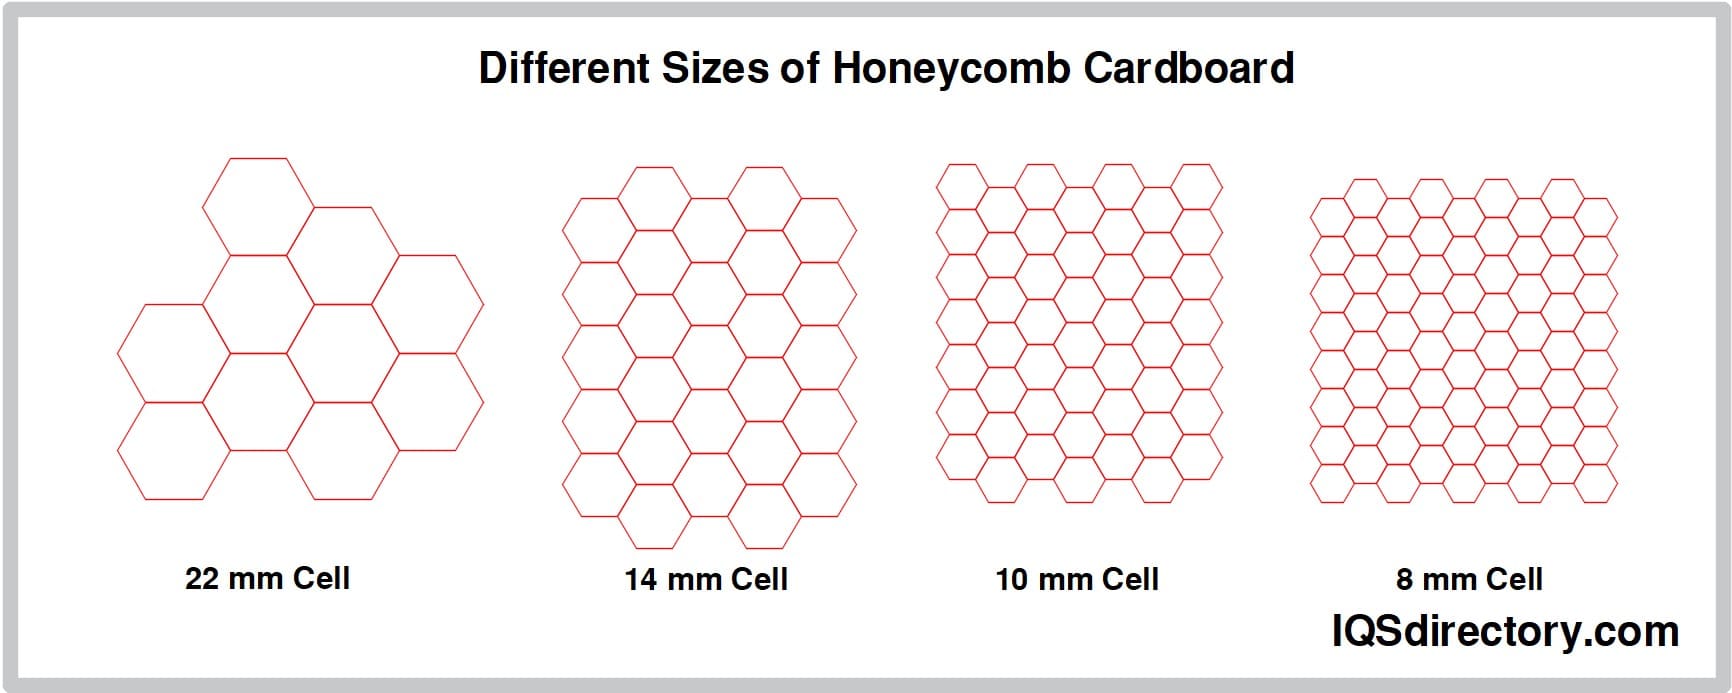 Different Sizes of Honeycomb Cardboard